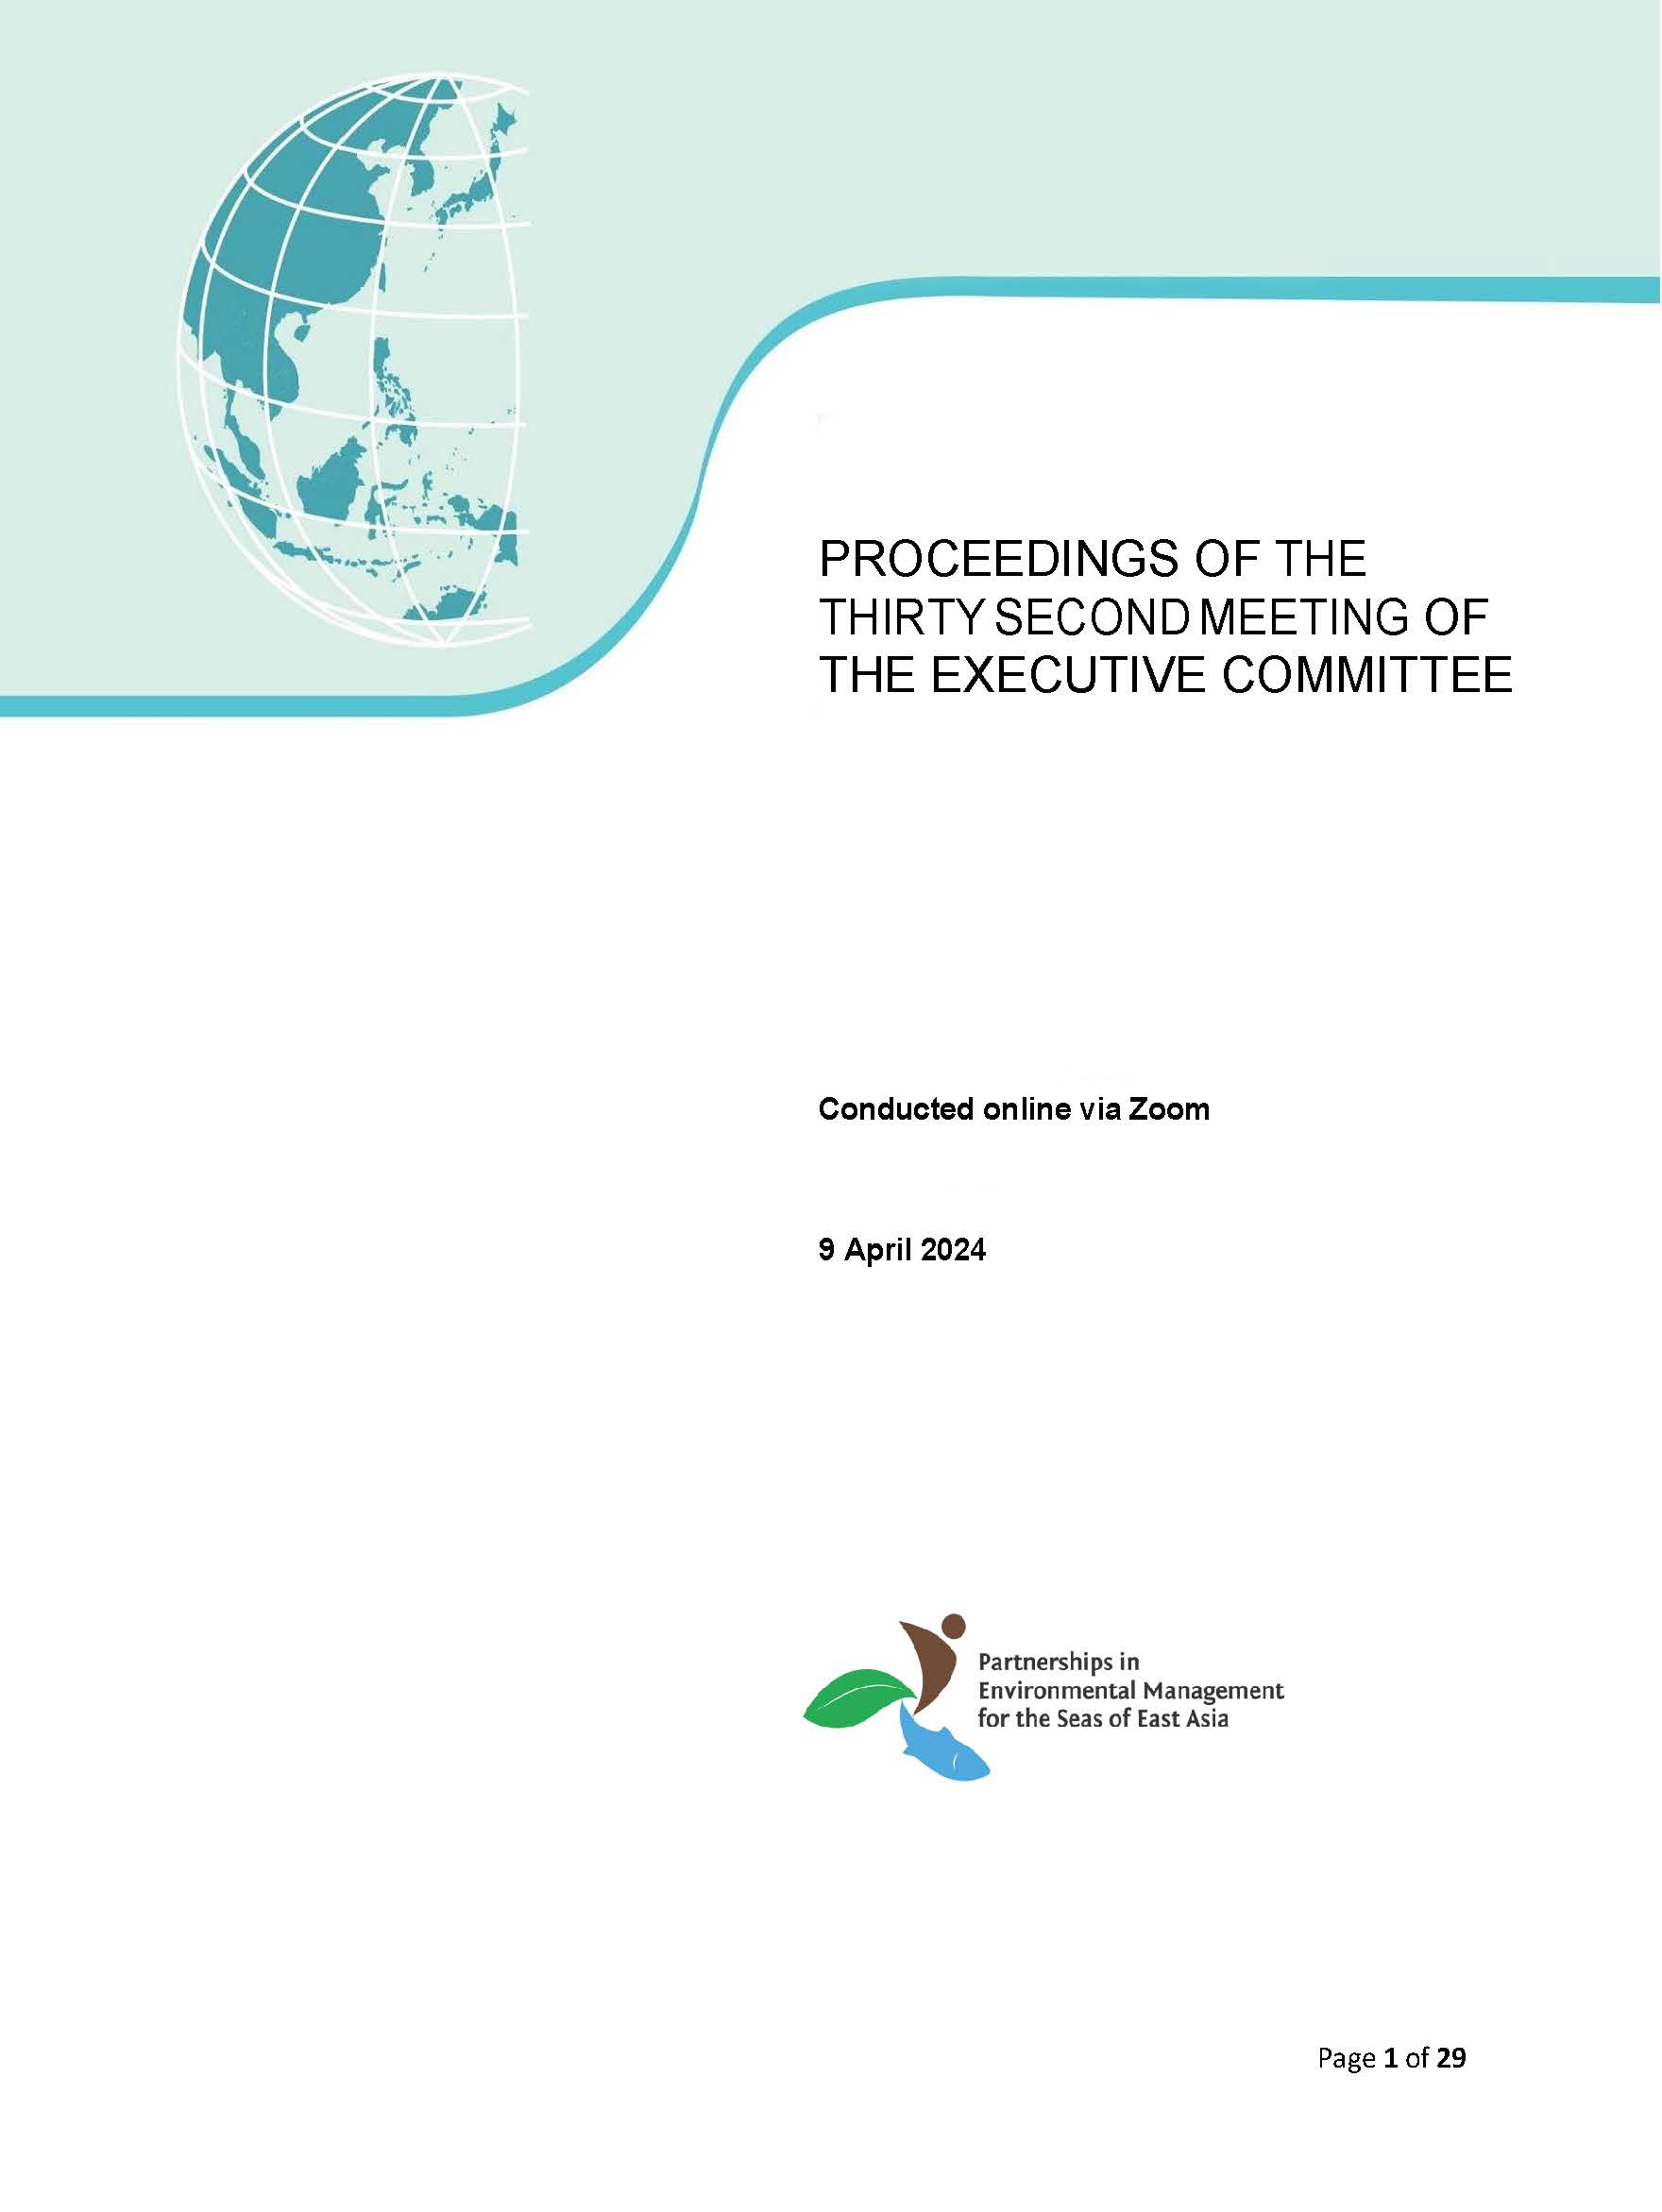 Proceedings of the Thirty Second Meeting of the Executive Committee